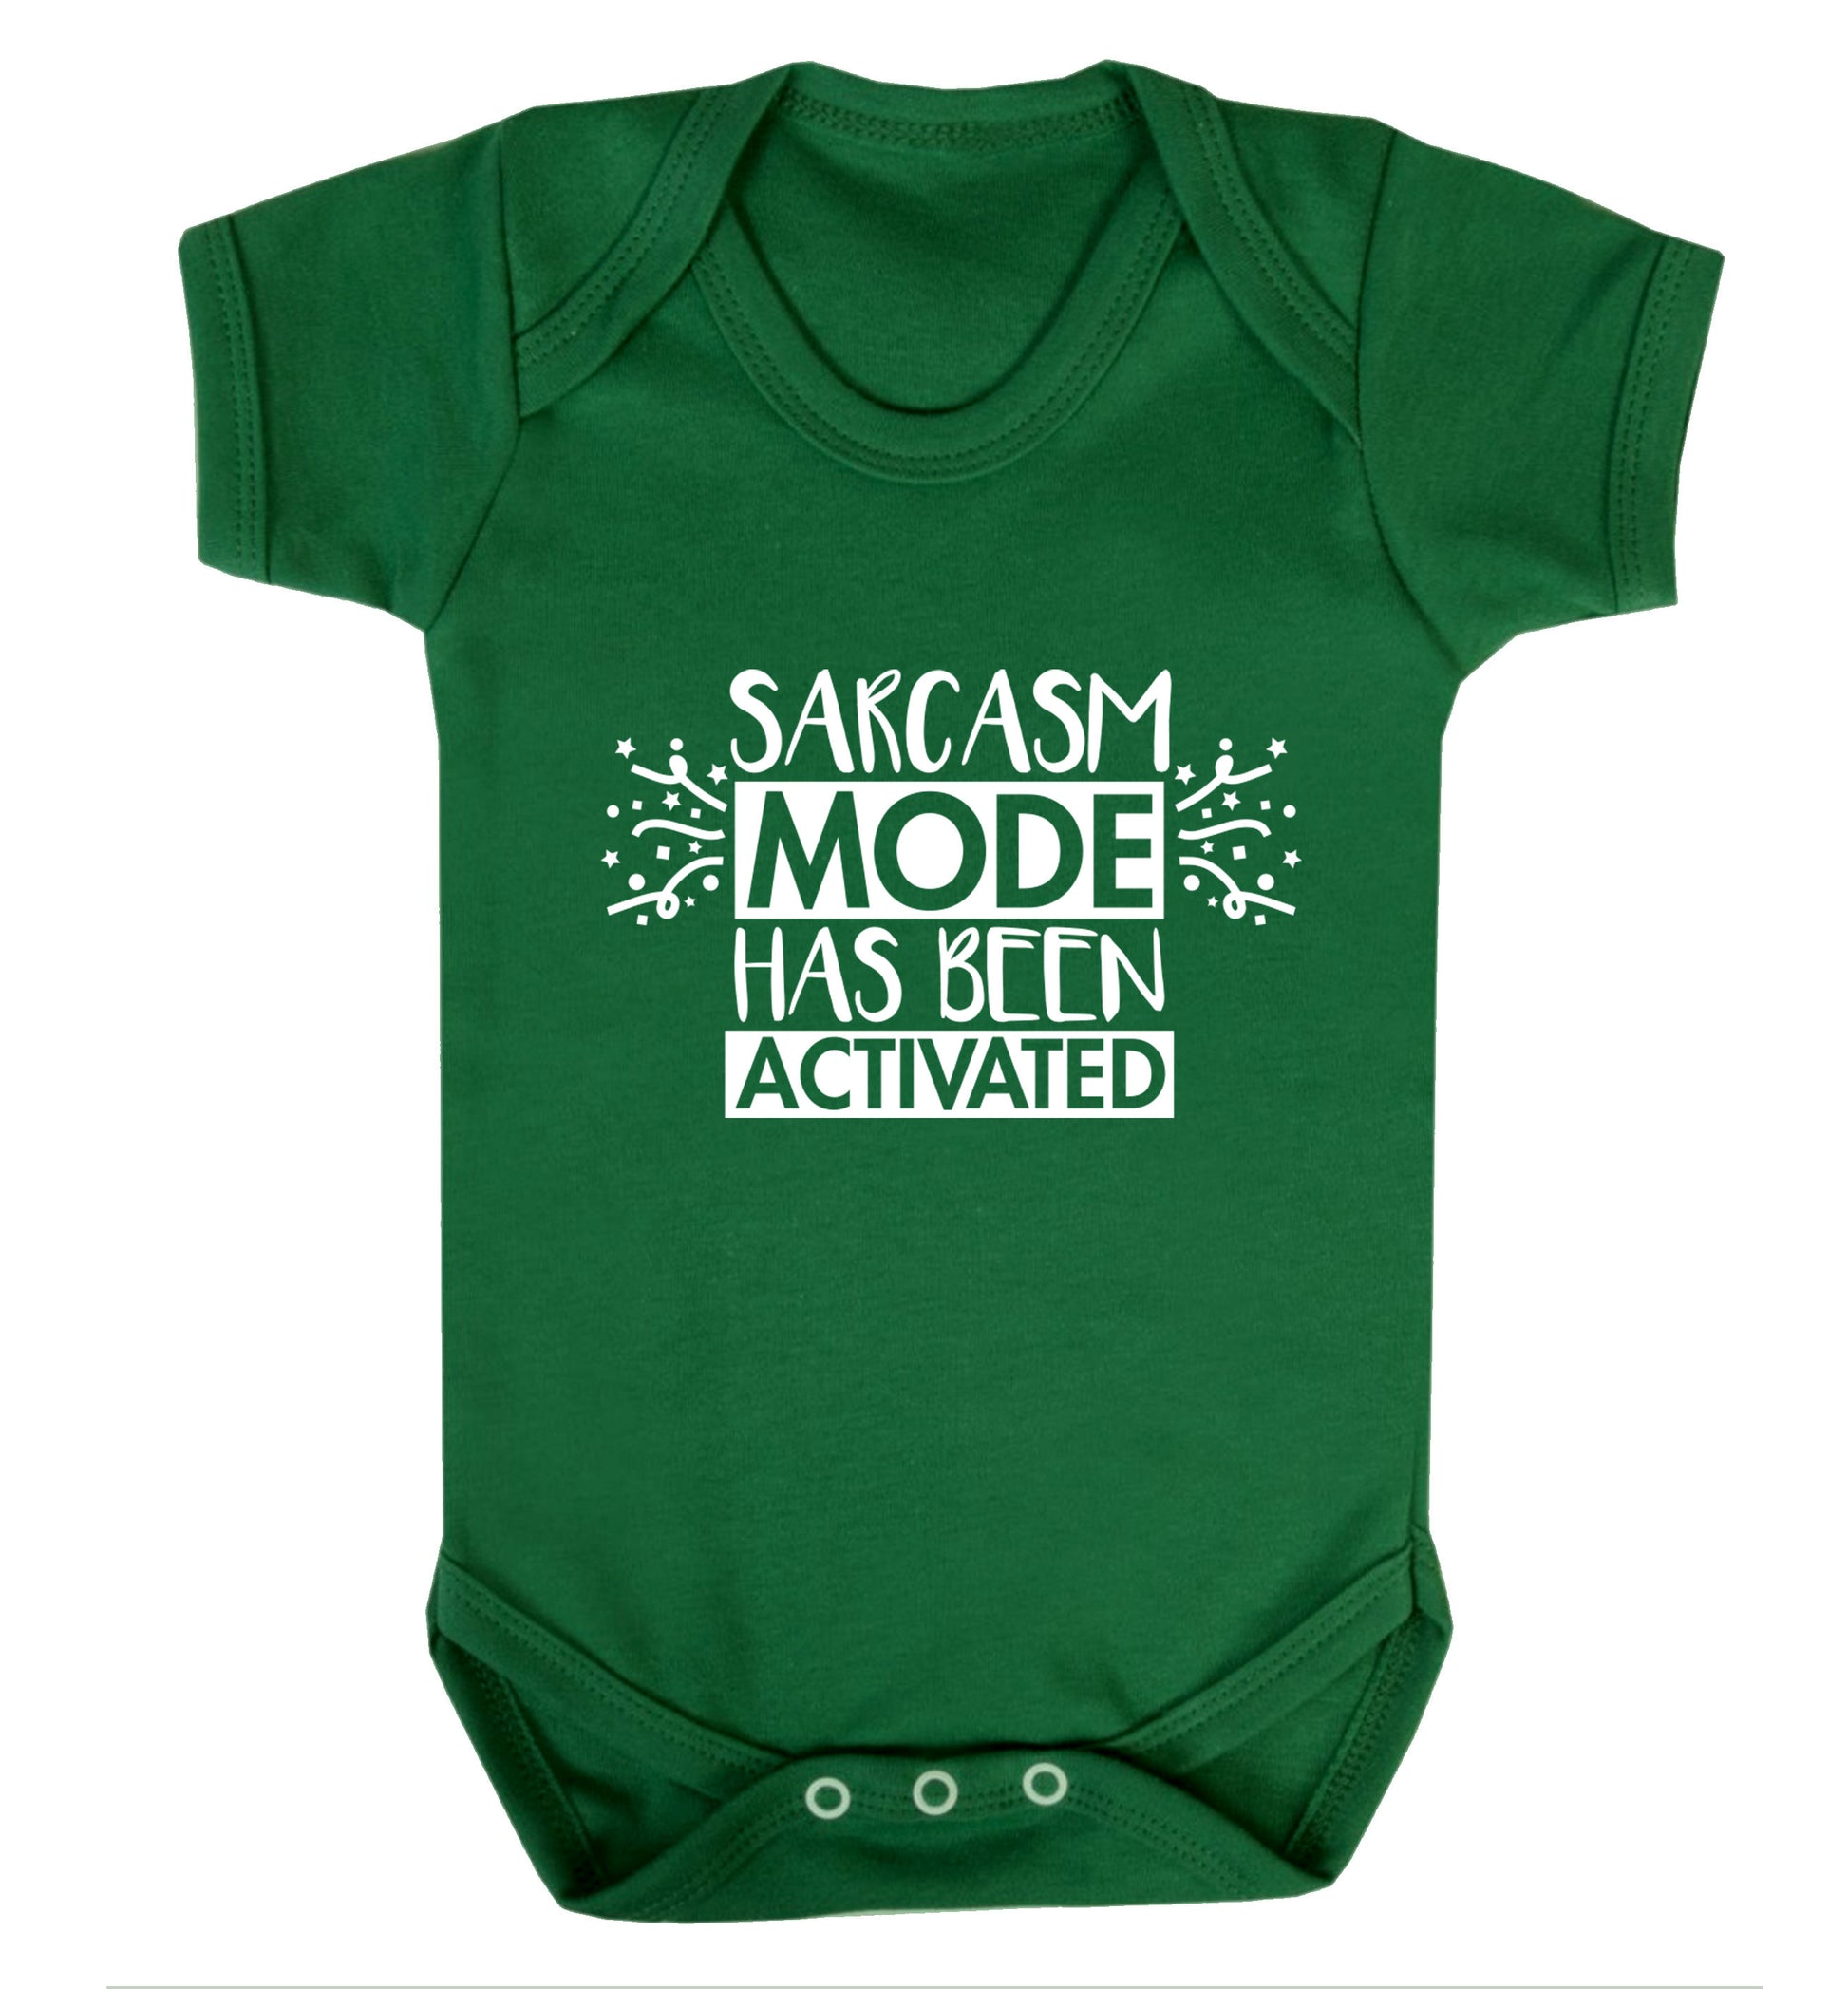 Sarcarsm mode has been activated Baby Vest green 18-24 months